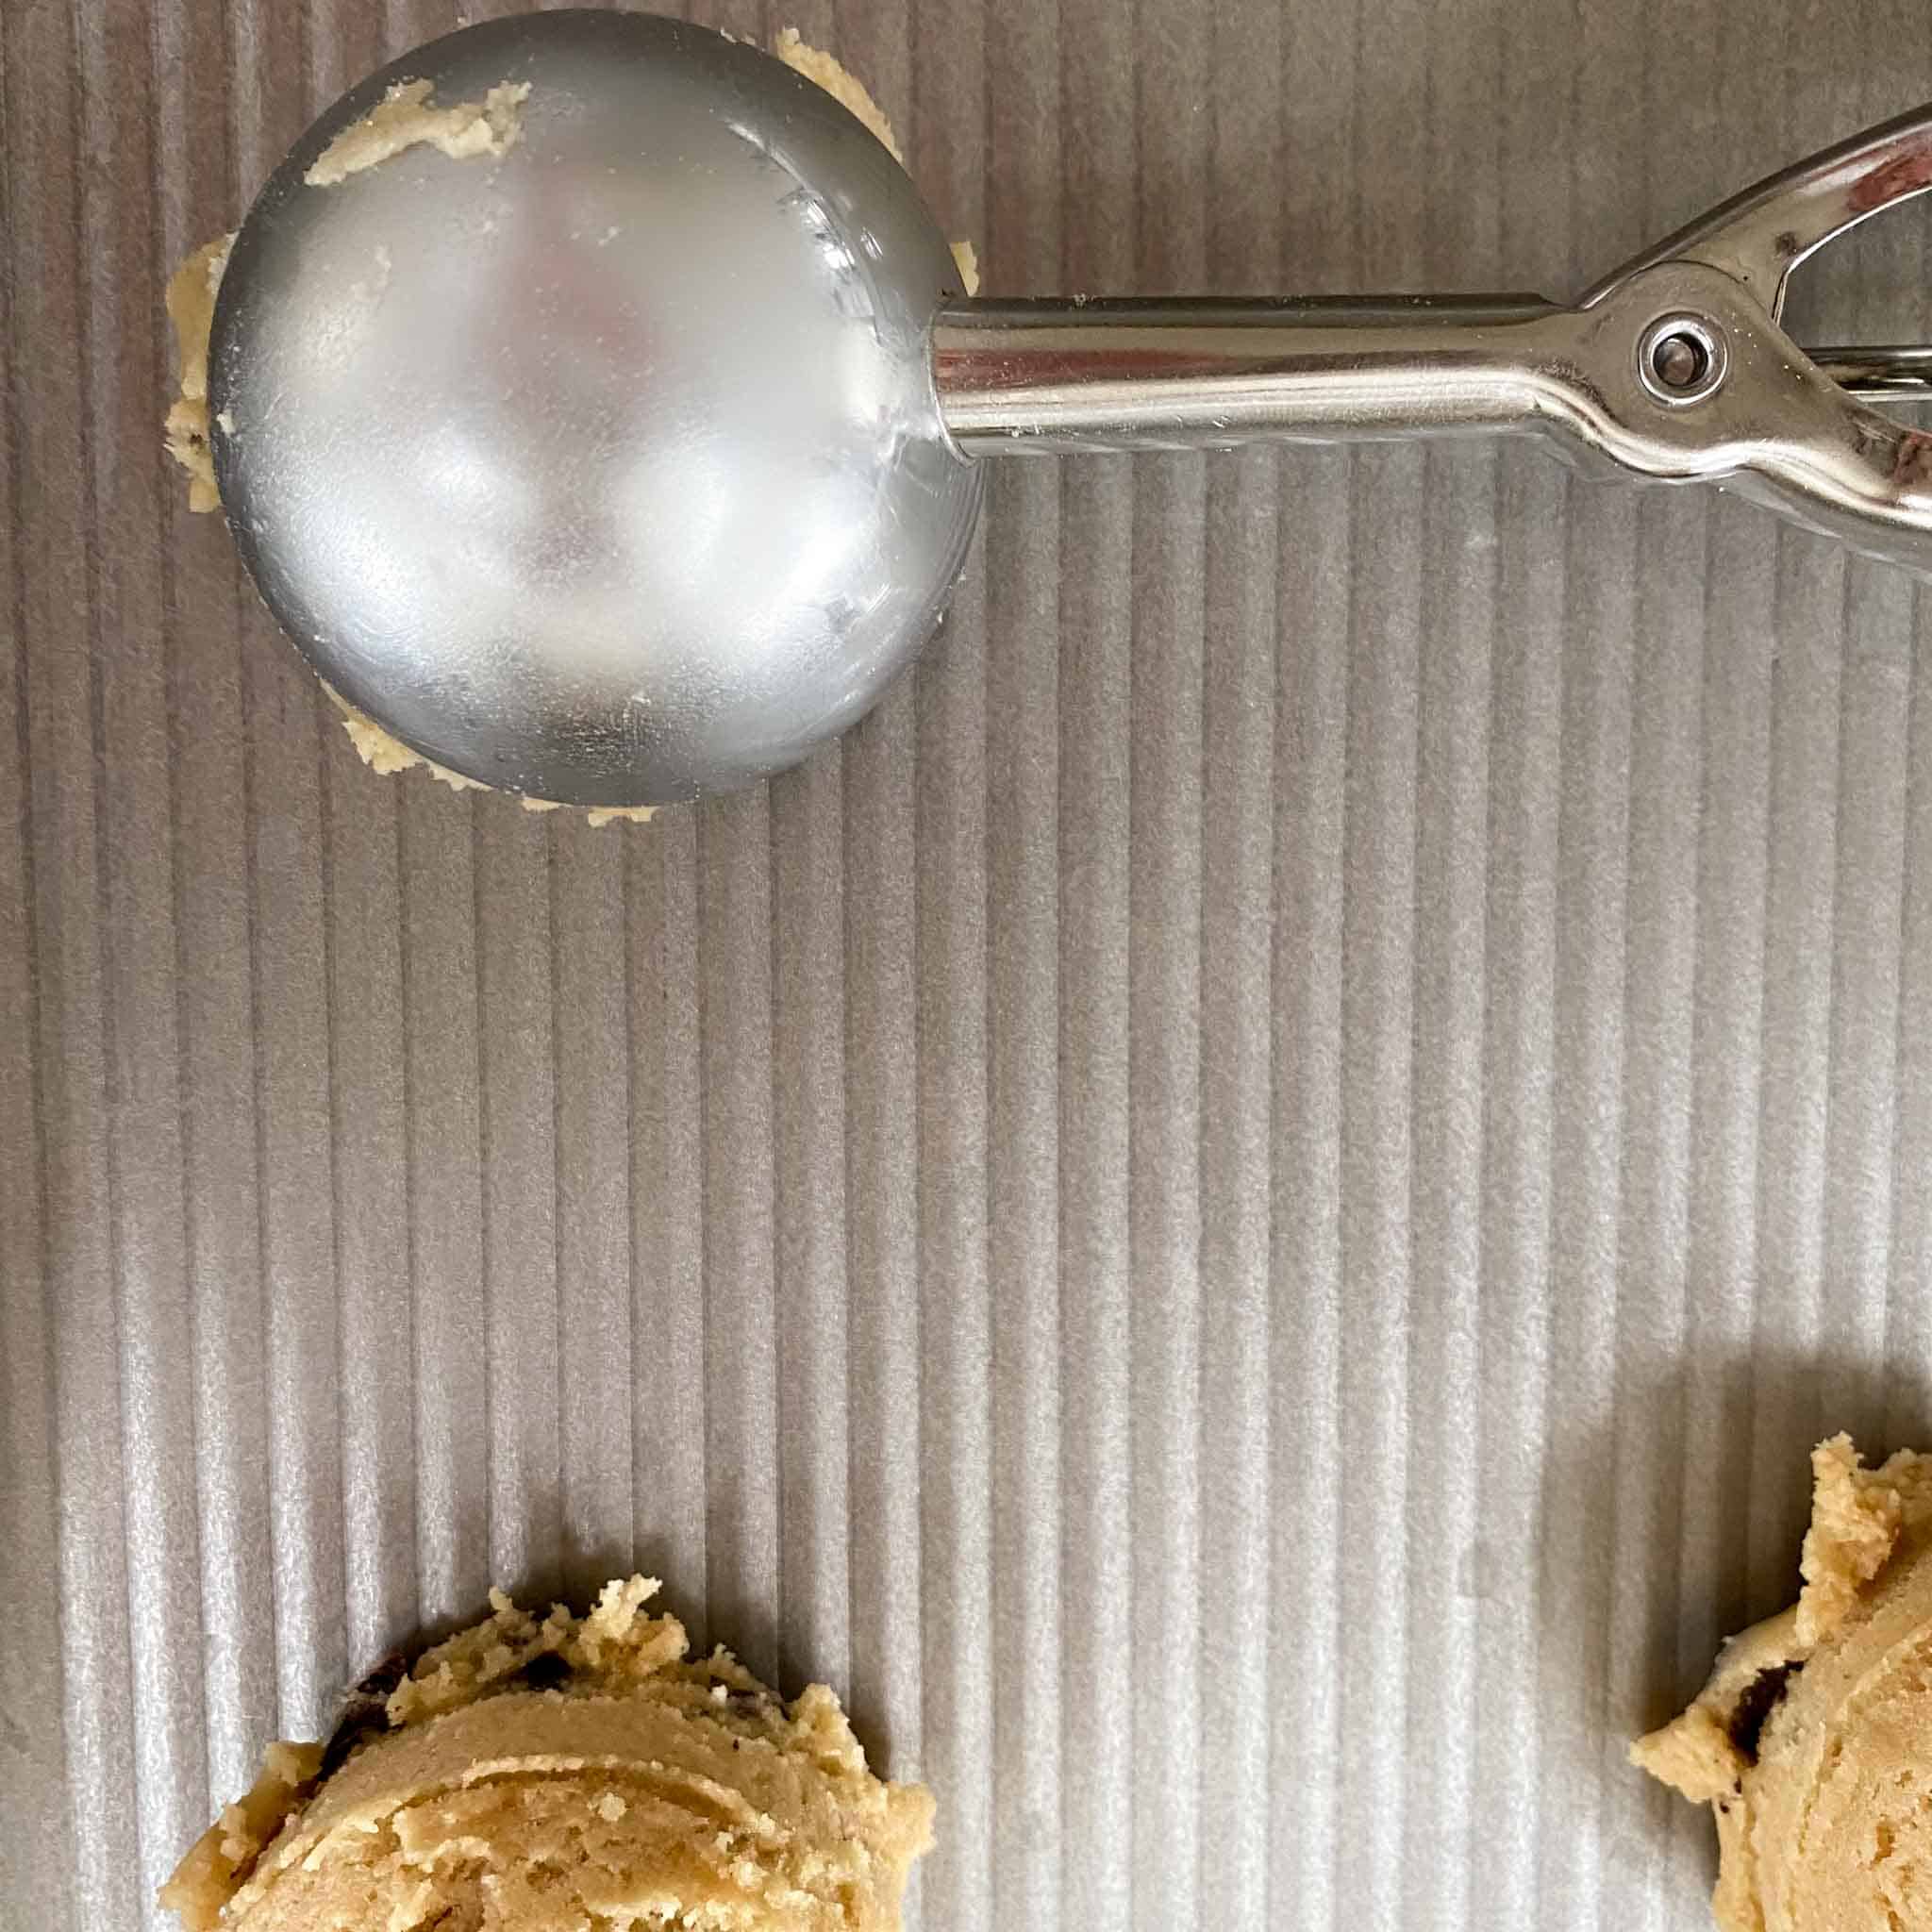 Large cookie scoop dropping chocolate chip cookies without butter on a cookie sheet.